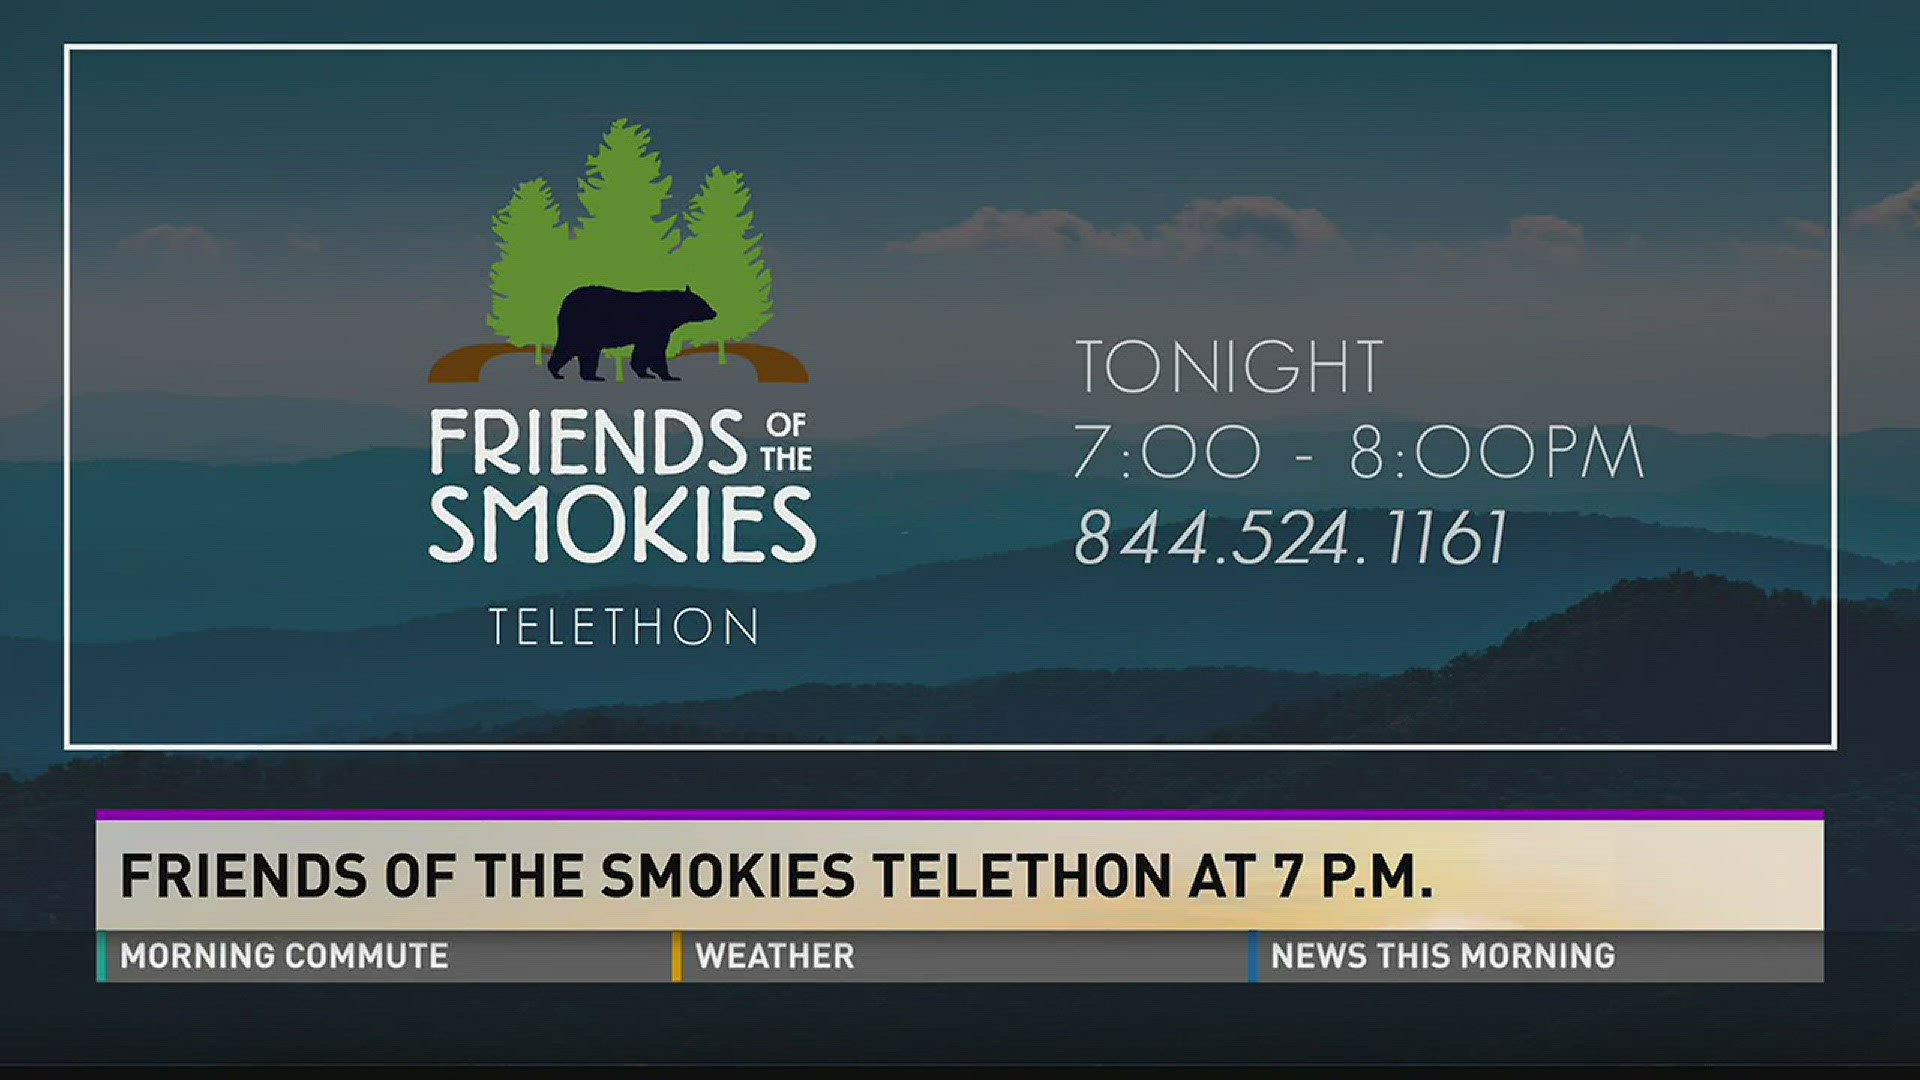 WBIR will once again host the annual Friends Across the Mountains Telethon on Wednesday along with Asheville television station WLOS.